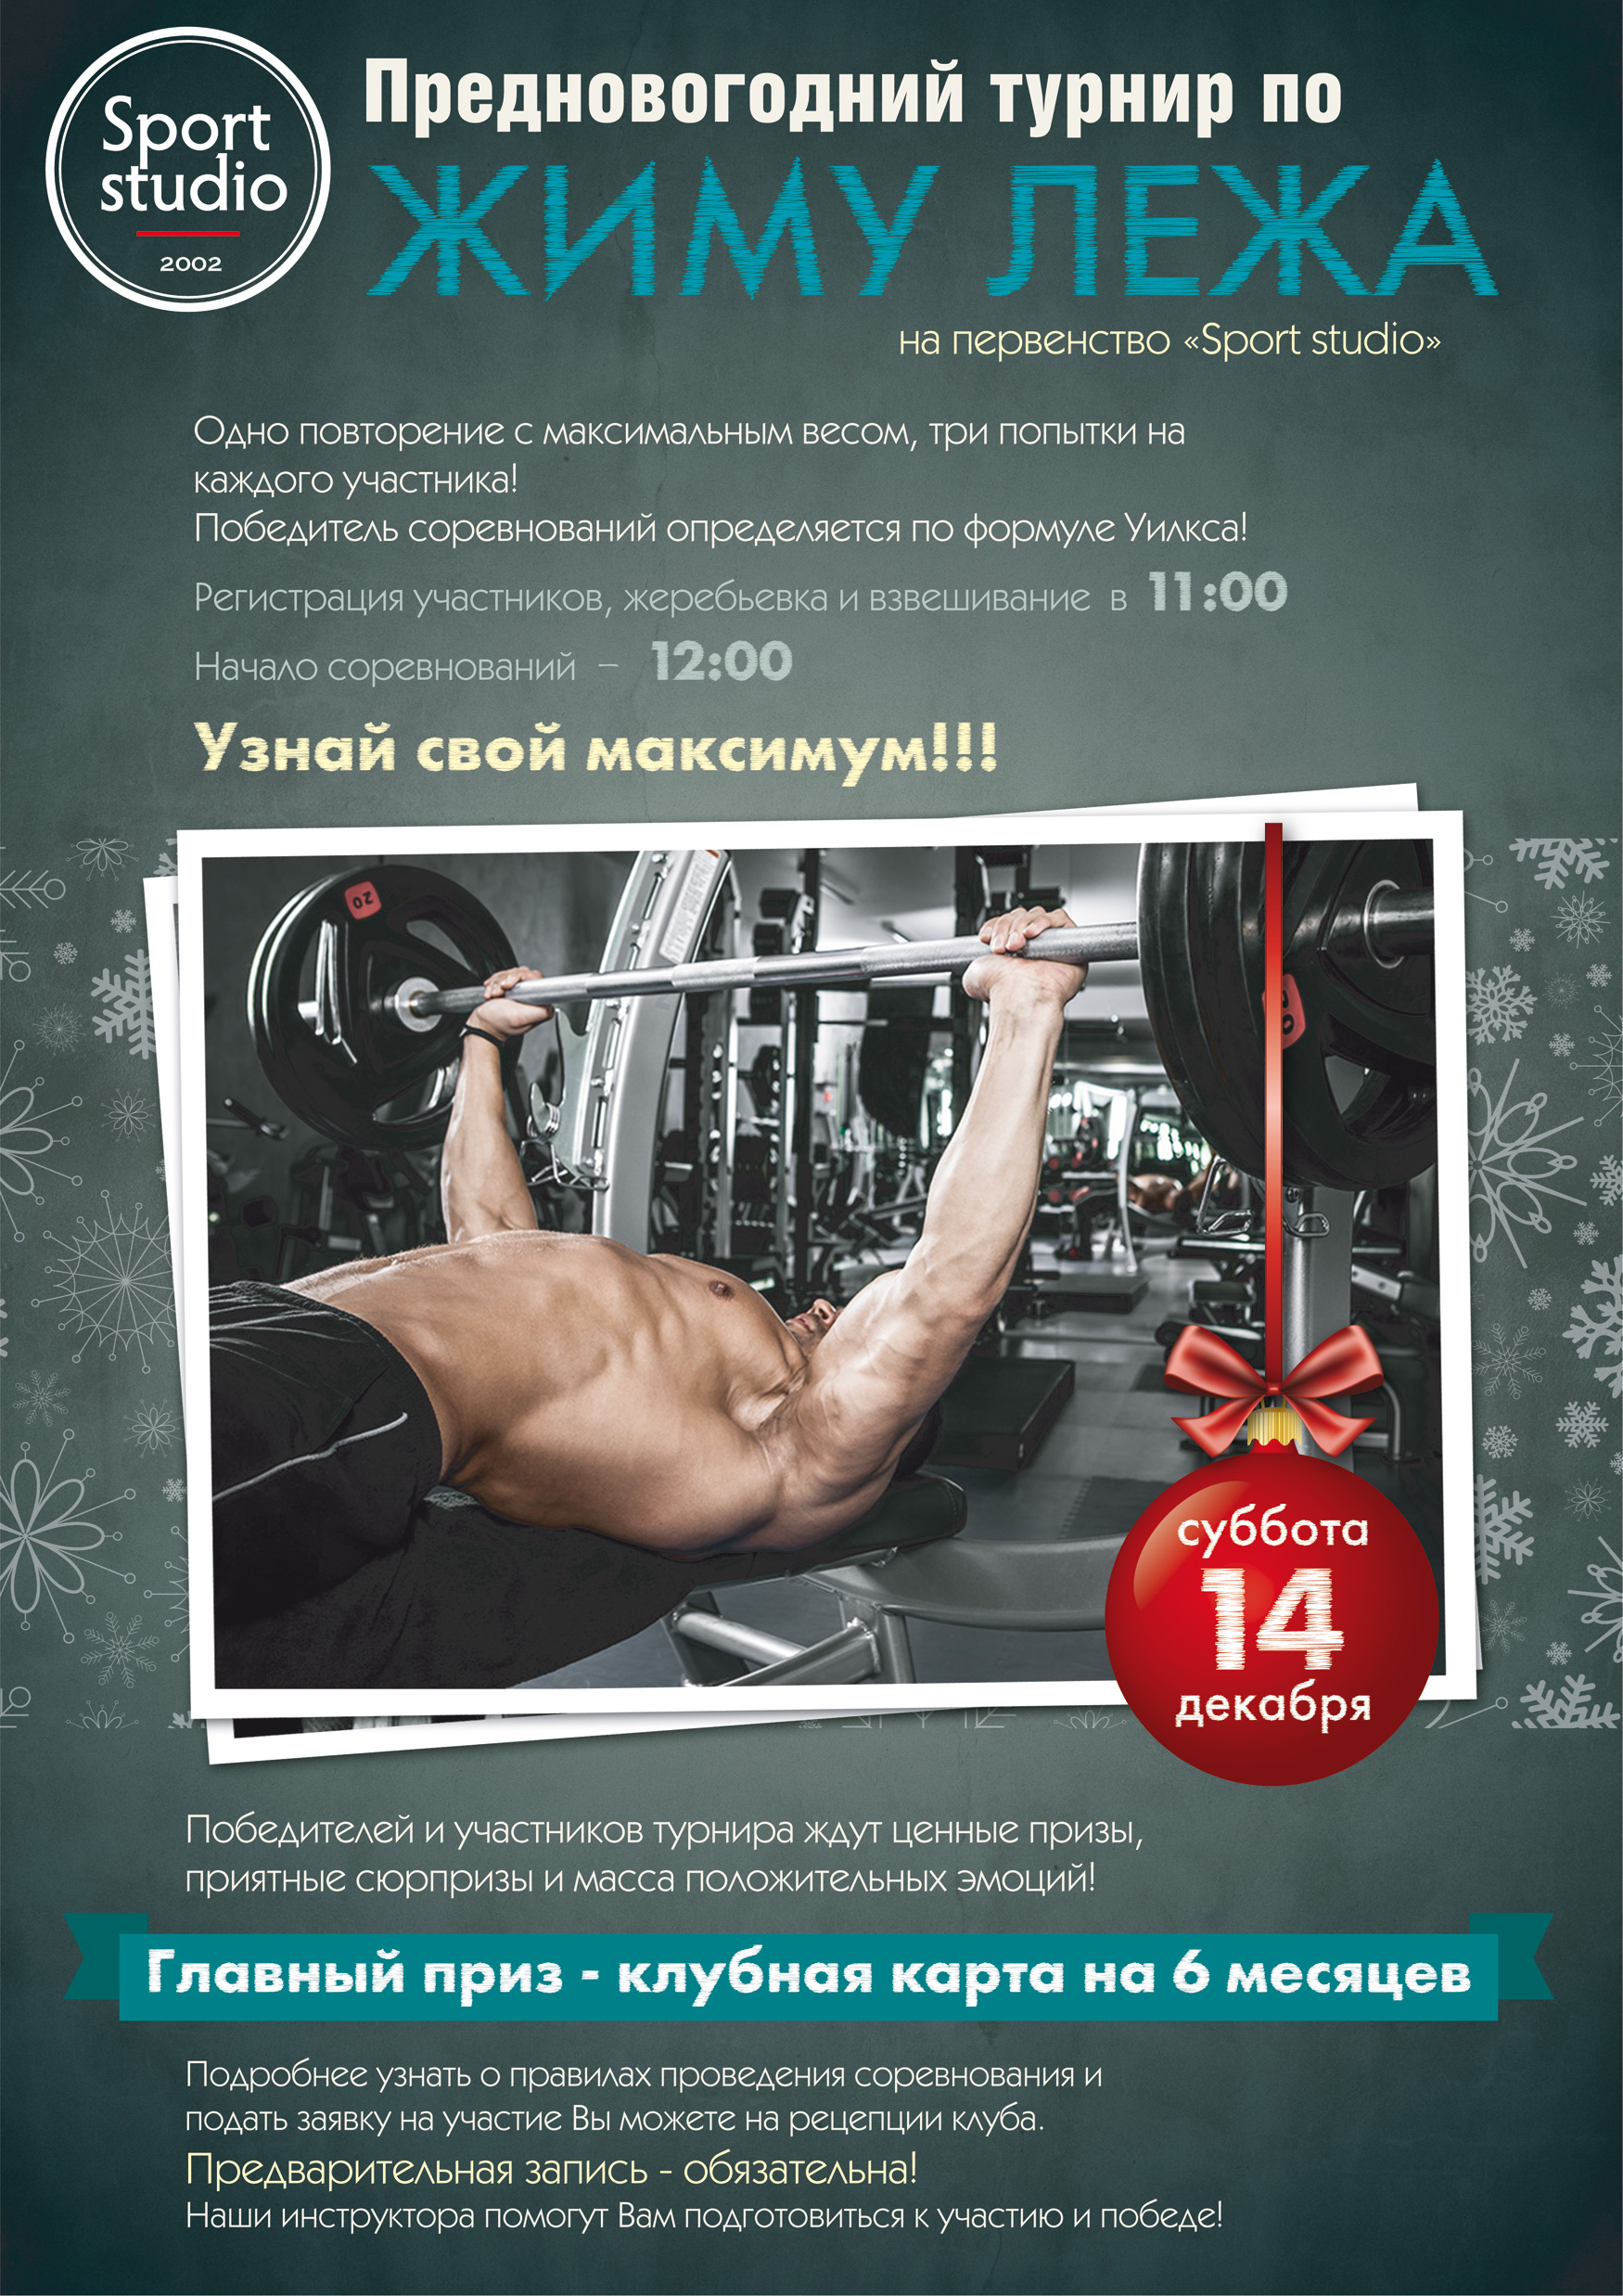 New Year's bench press competition